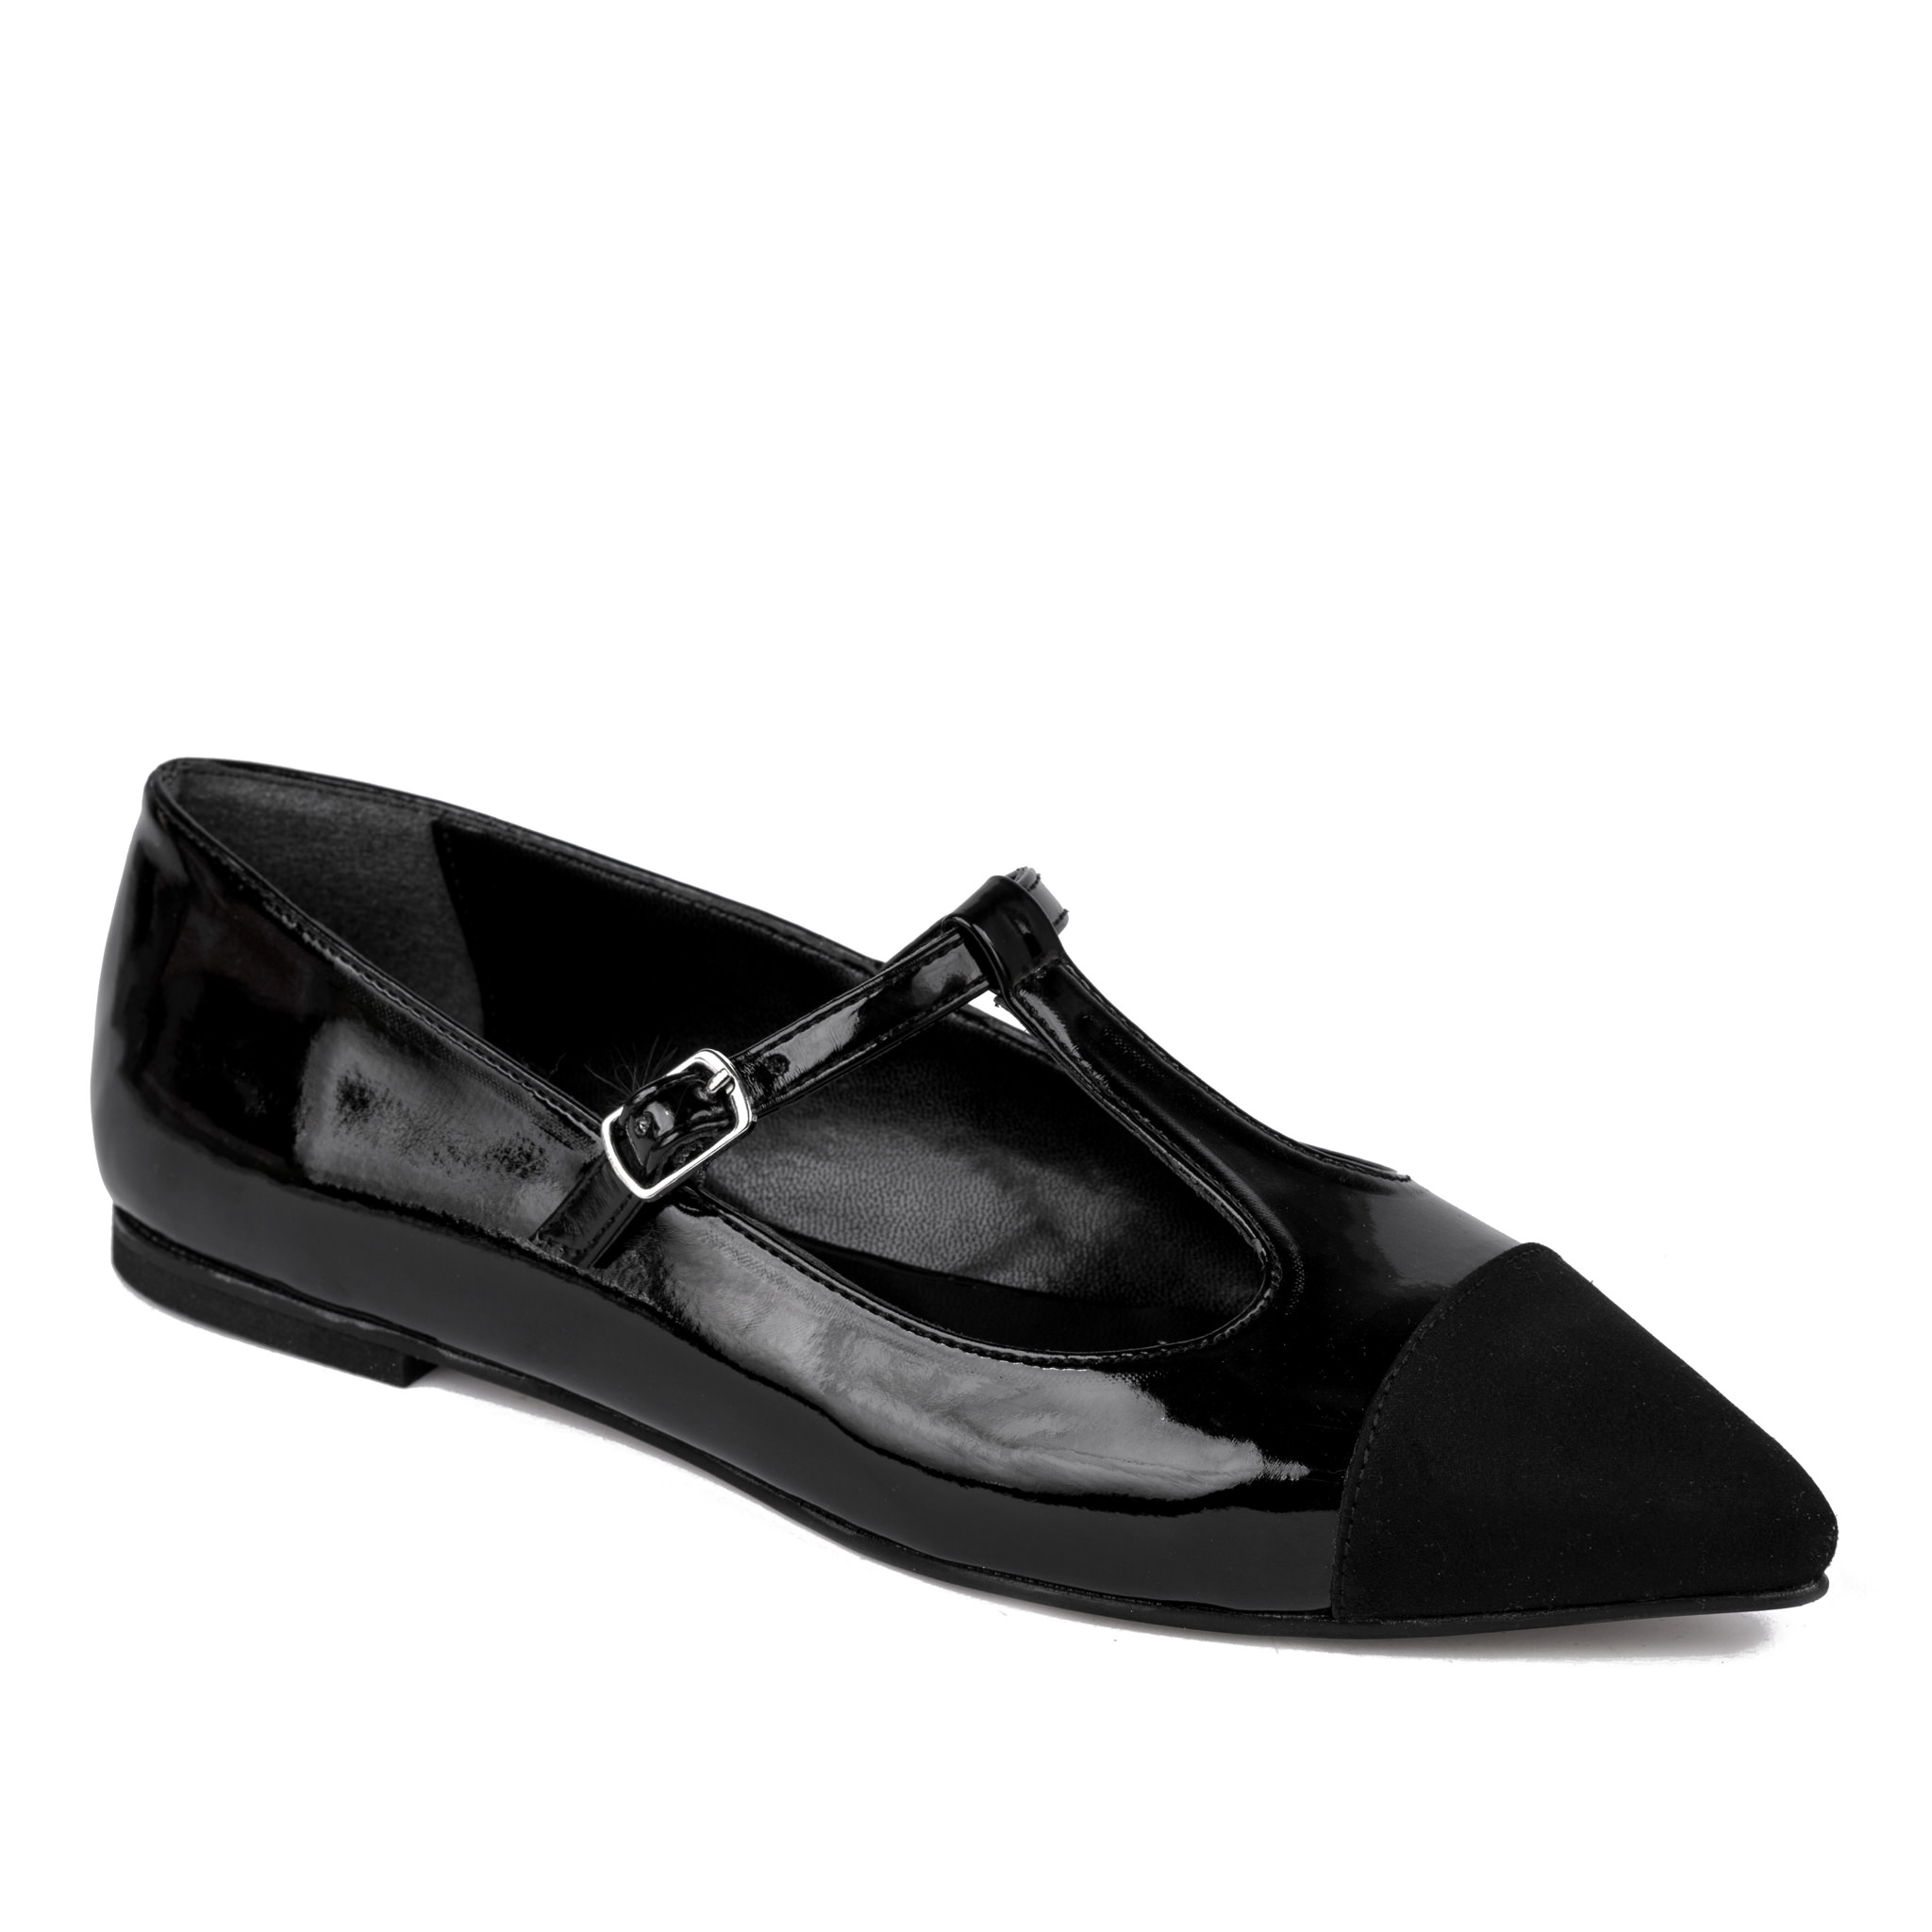 PATENT POINTED FLATS WITH BELT - BLACK